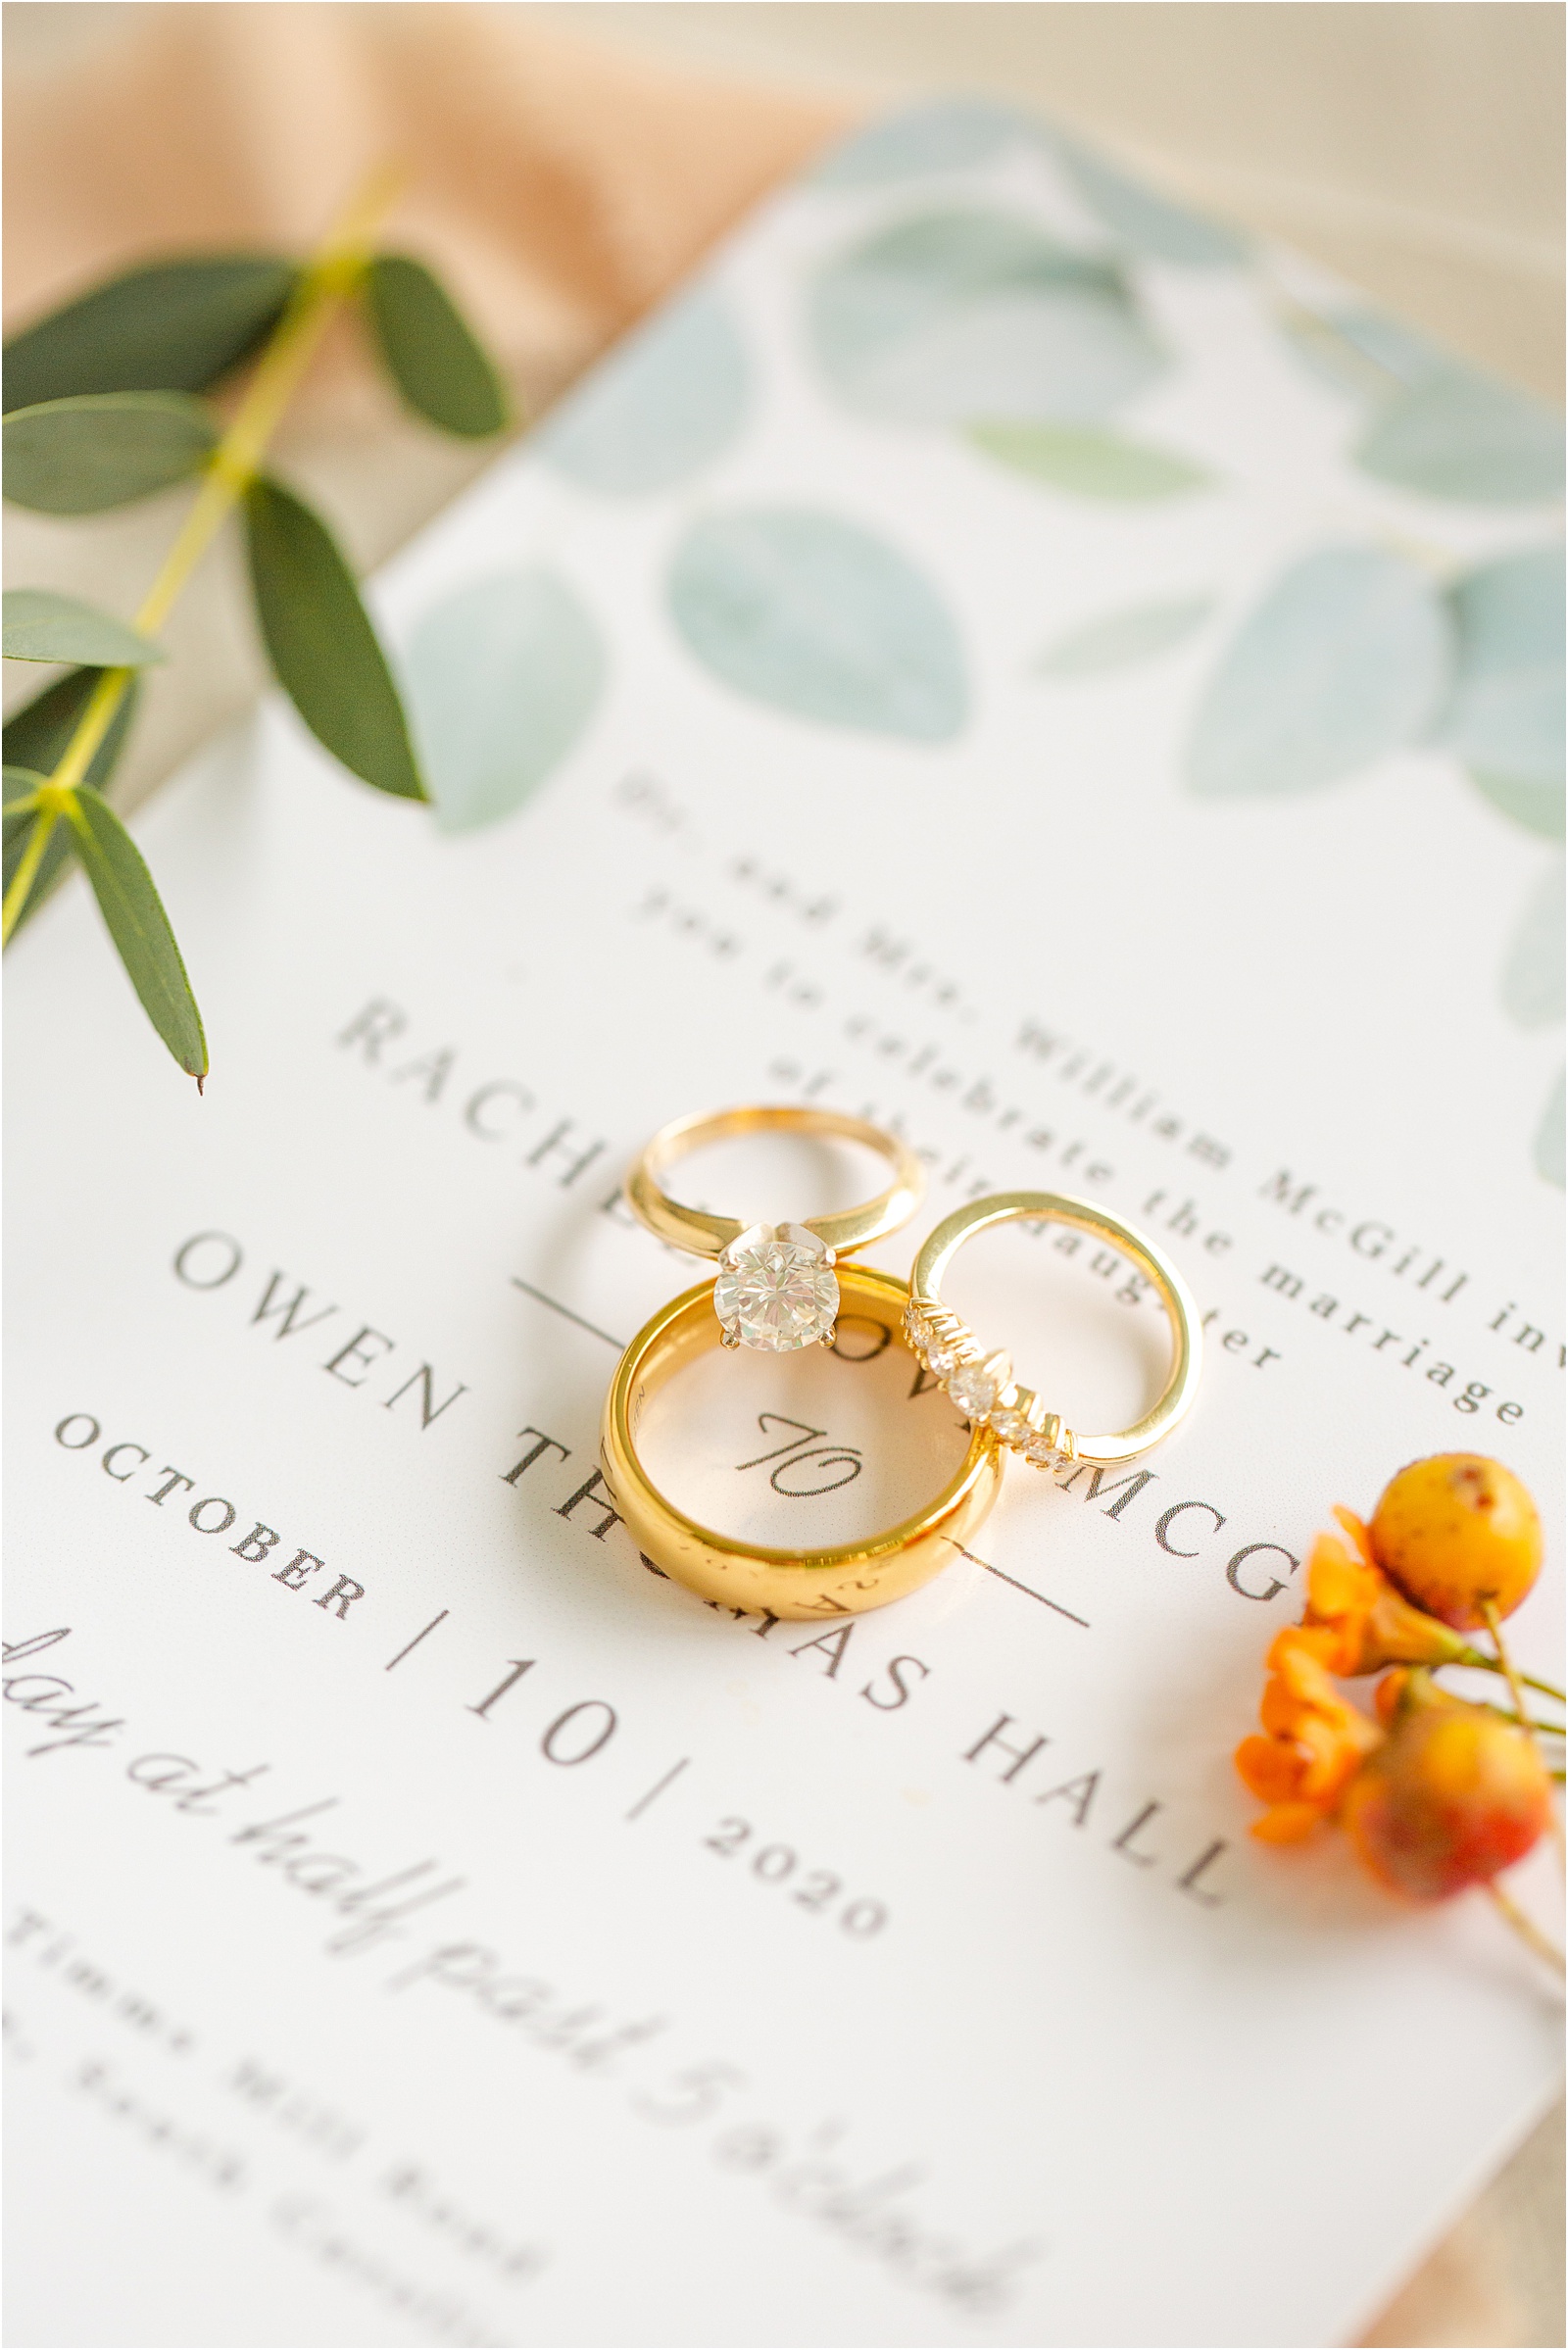 Three rings on top of a wedding invitation in Anderson South Carolina